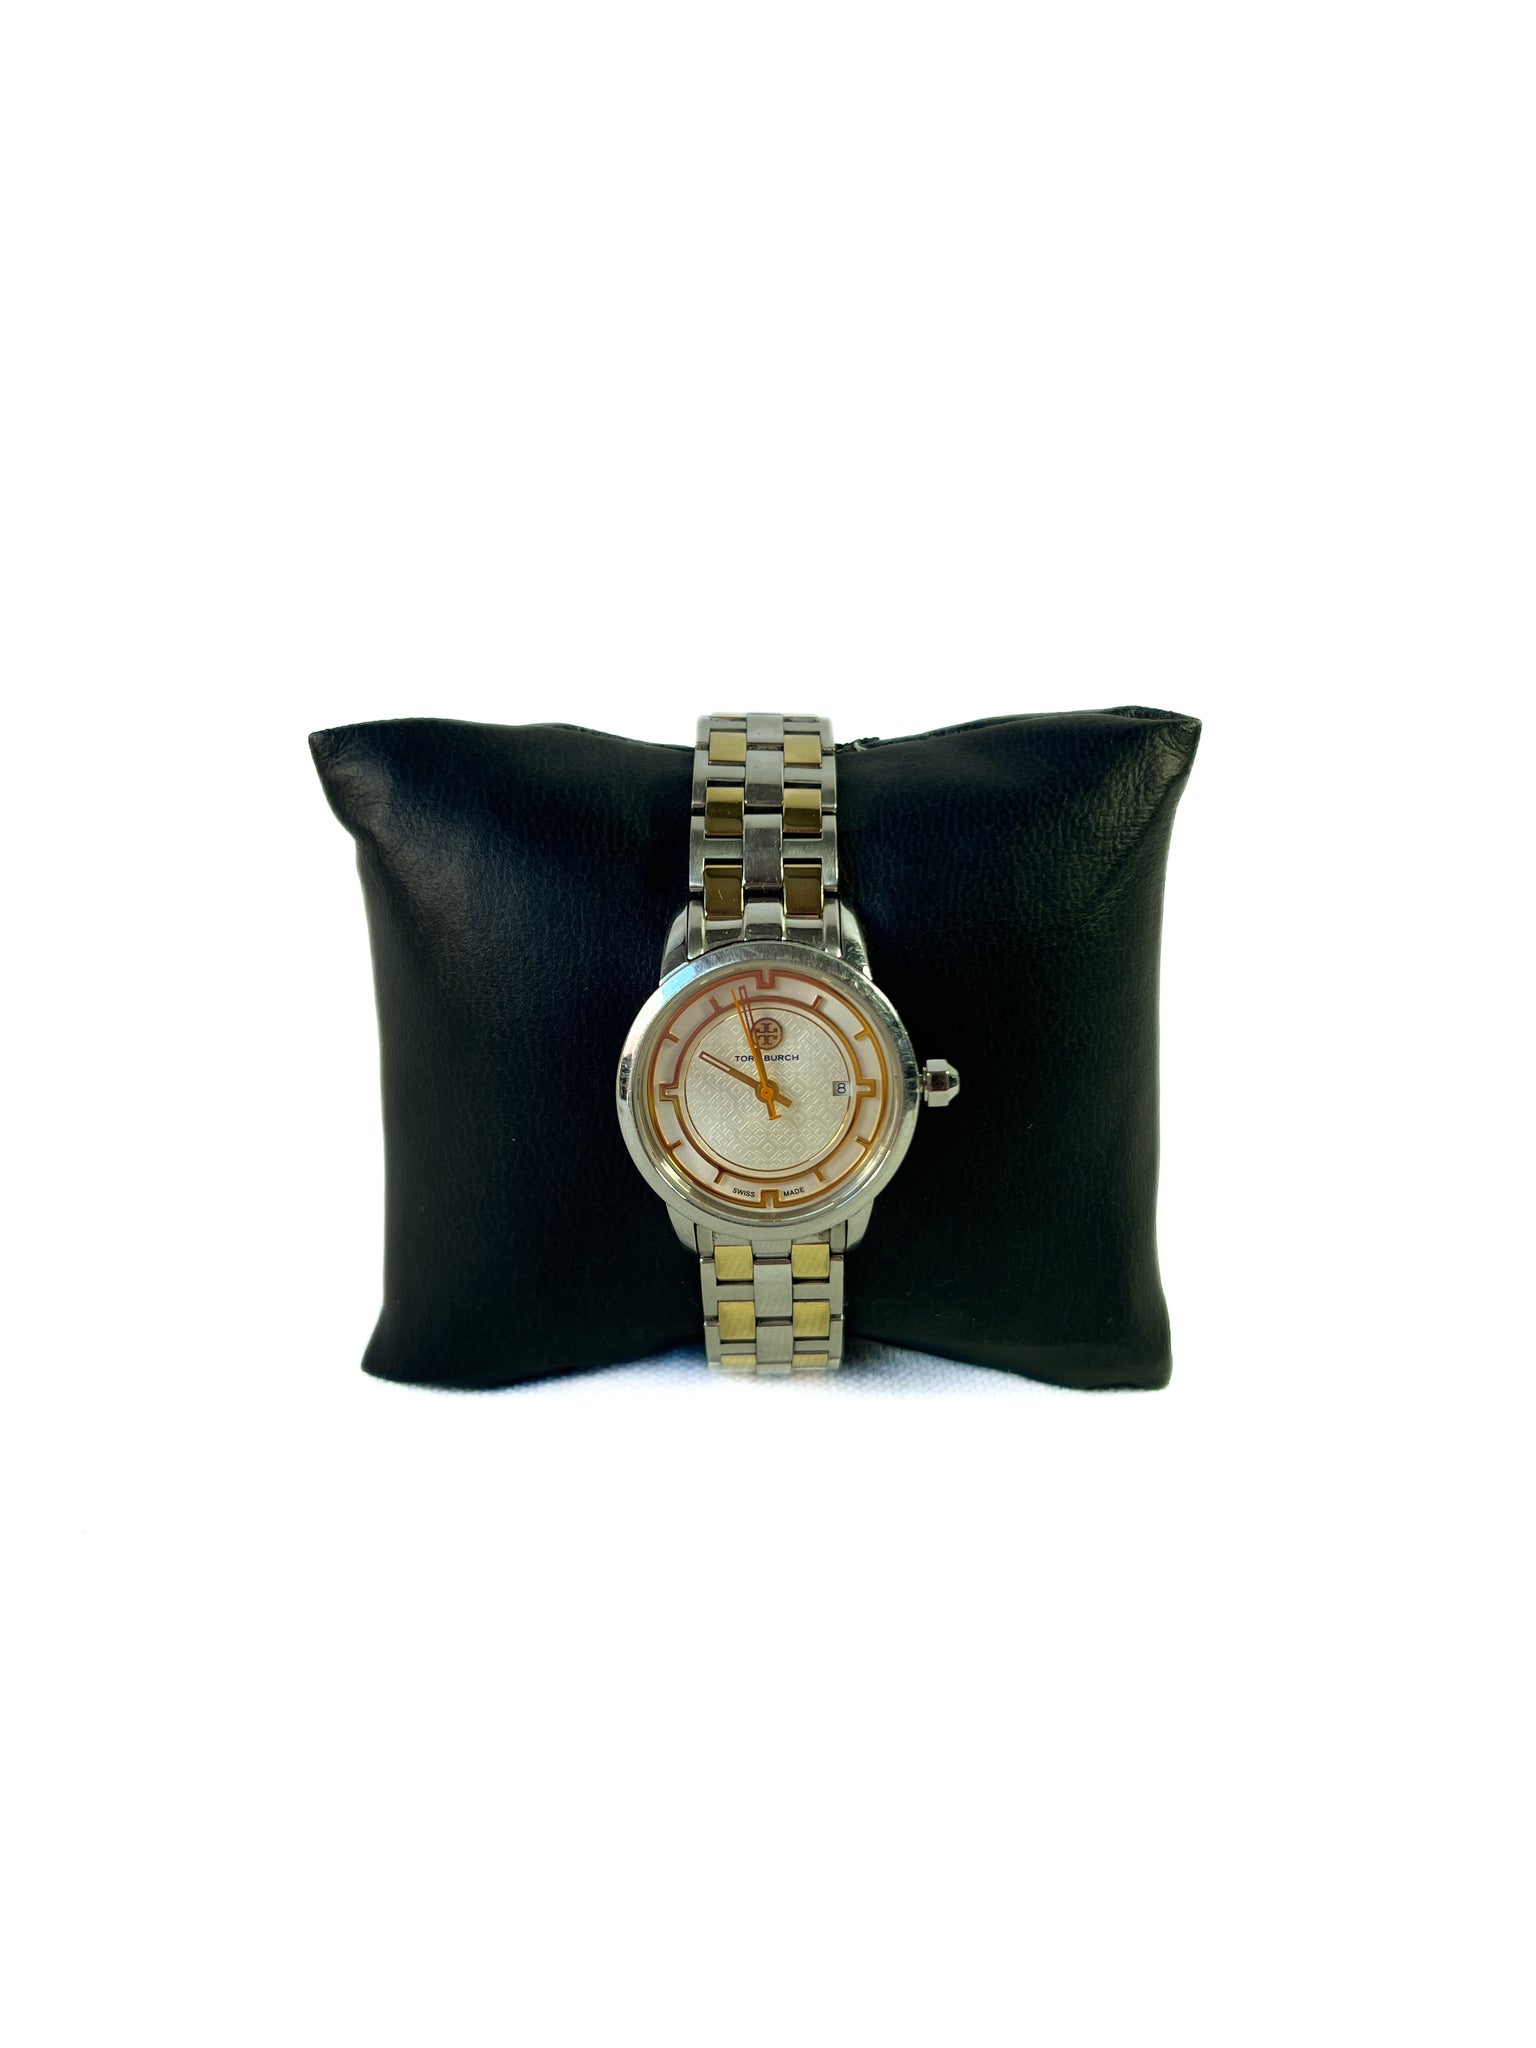 Tory Burch Swiss Made Watches for Women 